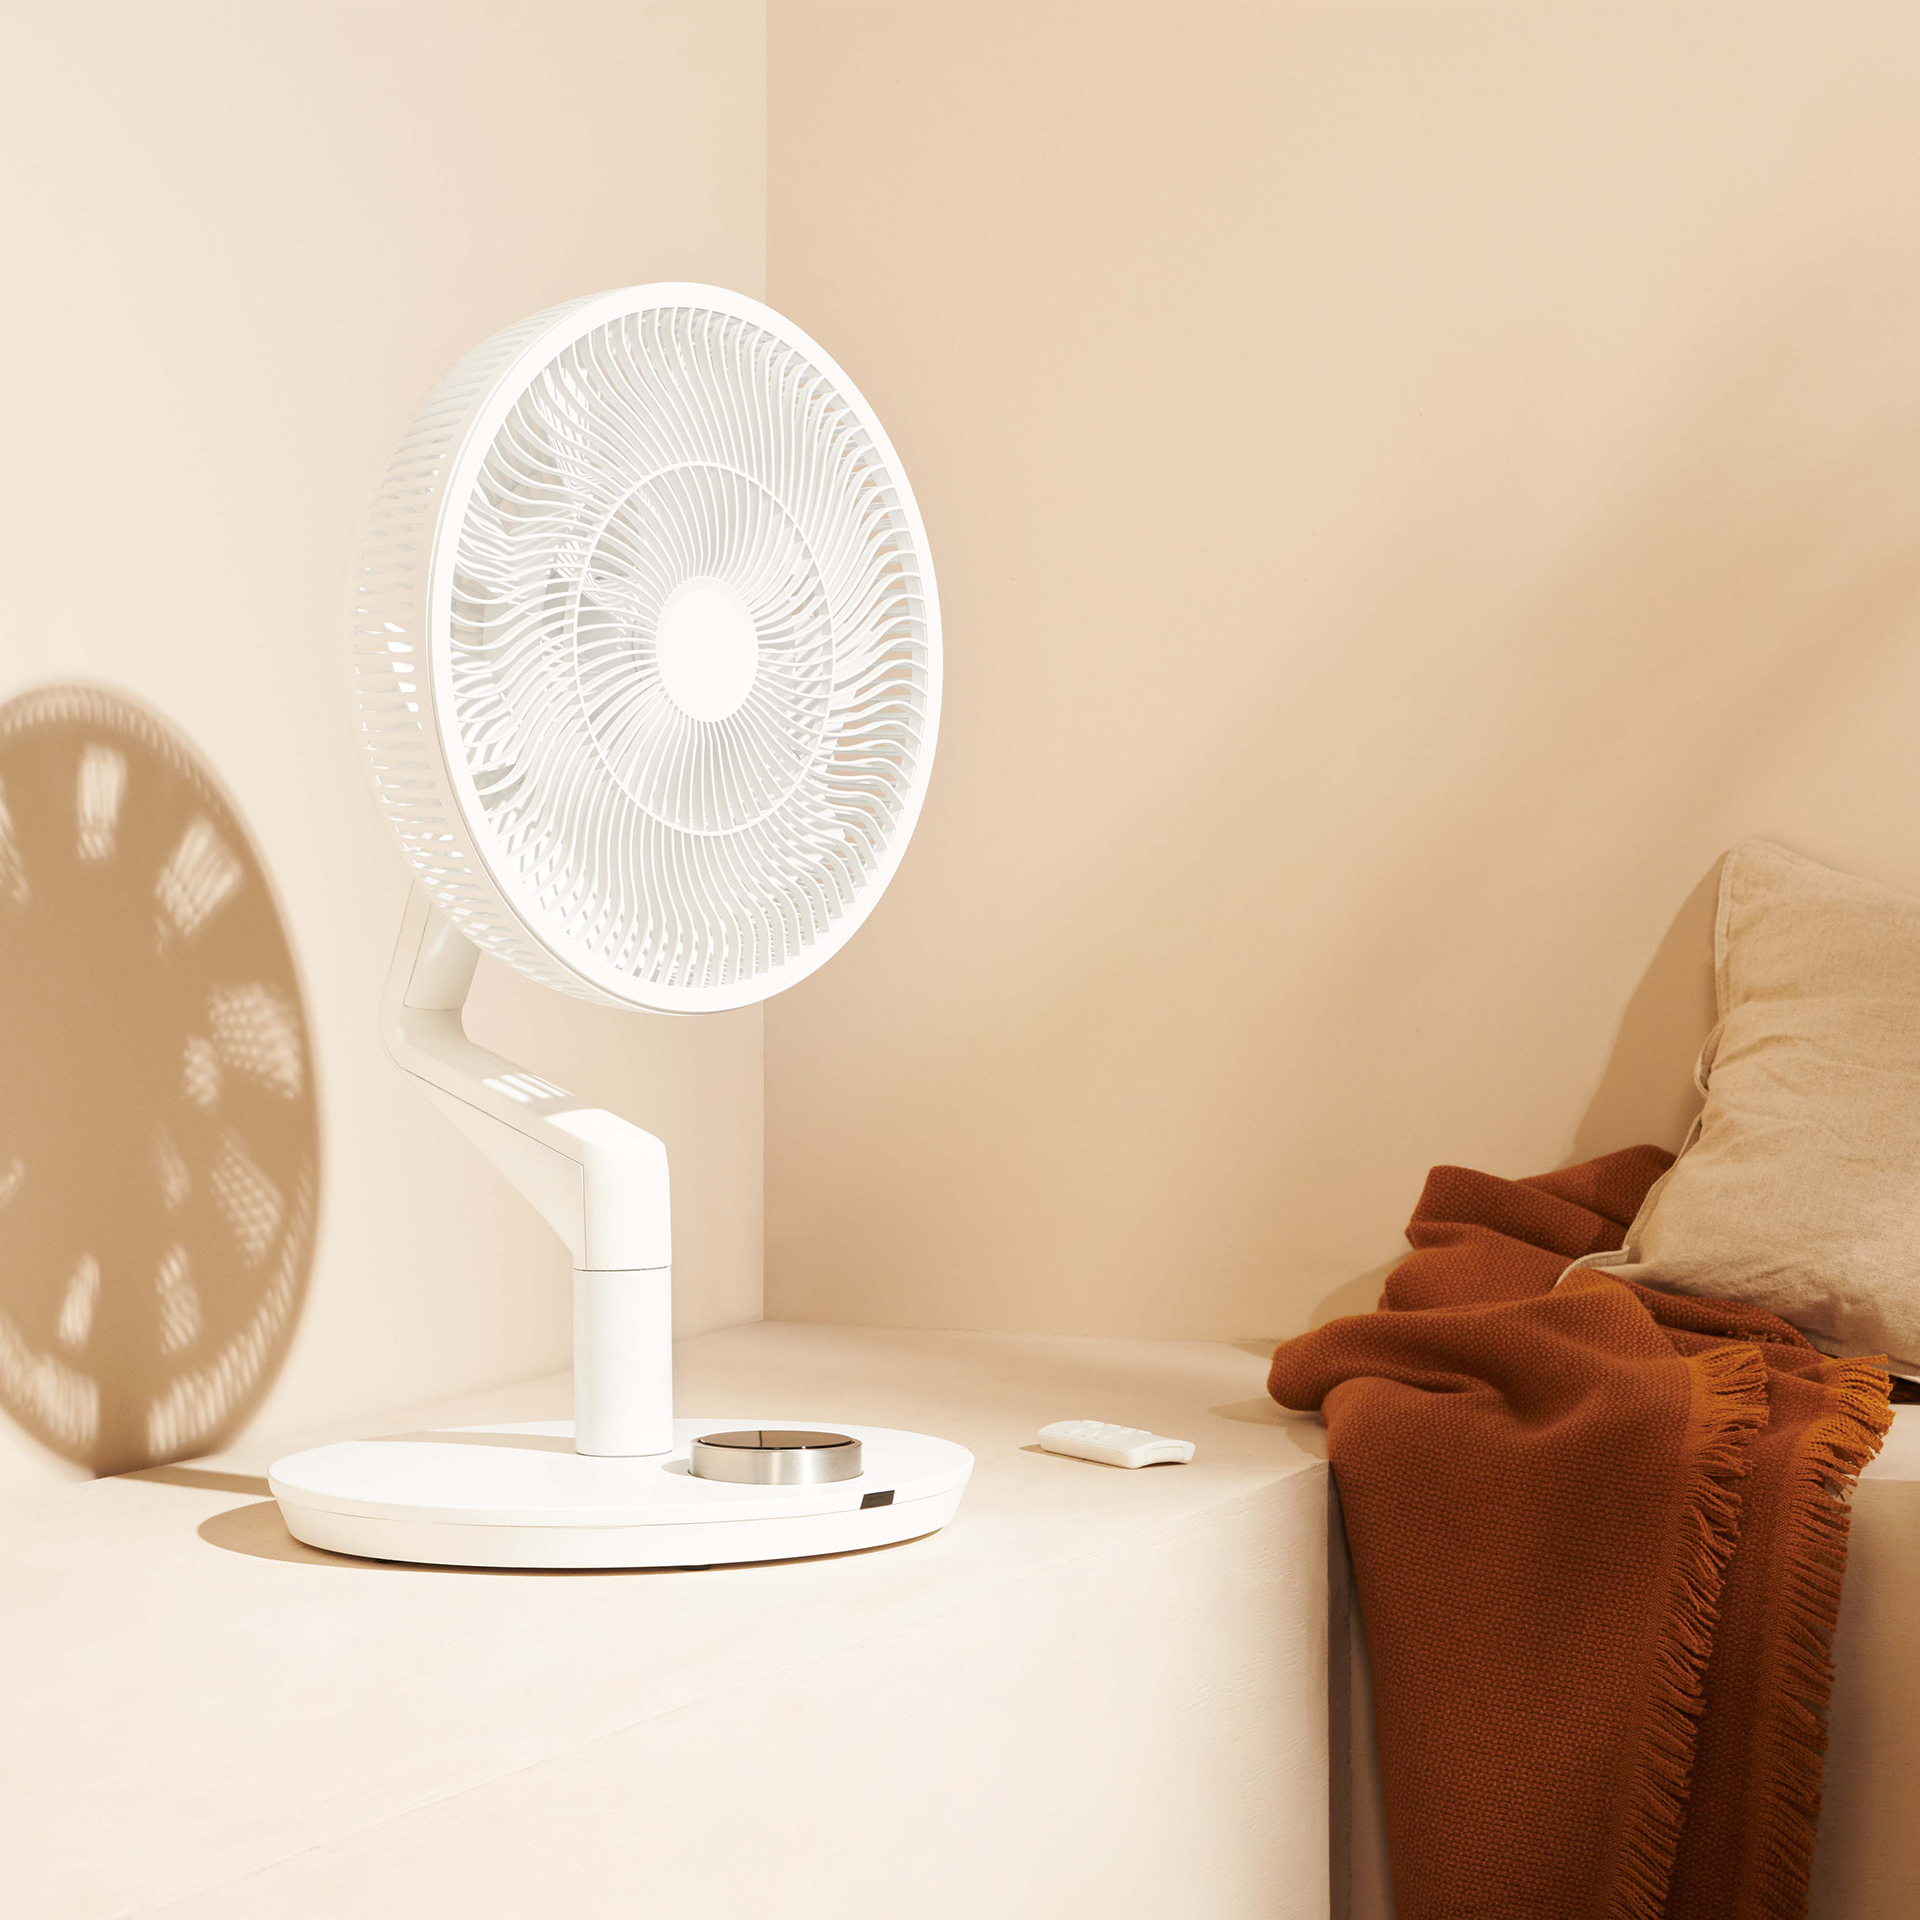 The Whisper Flex Ultimate Fan in Black from Duux is a minimalistic matte wireless smart fan that transforms any space into a tranquil haven, all while operating whisper quietly.